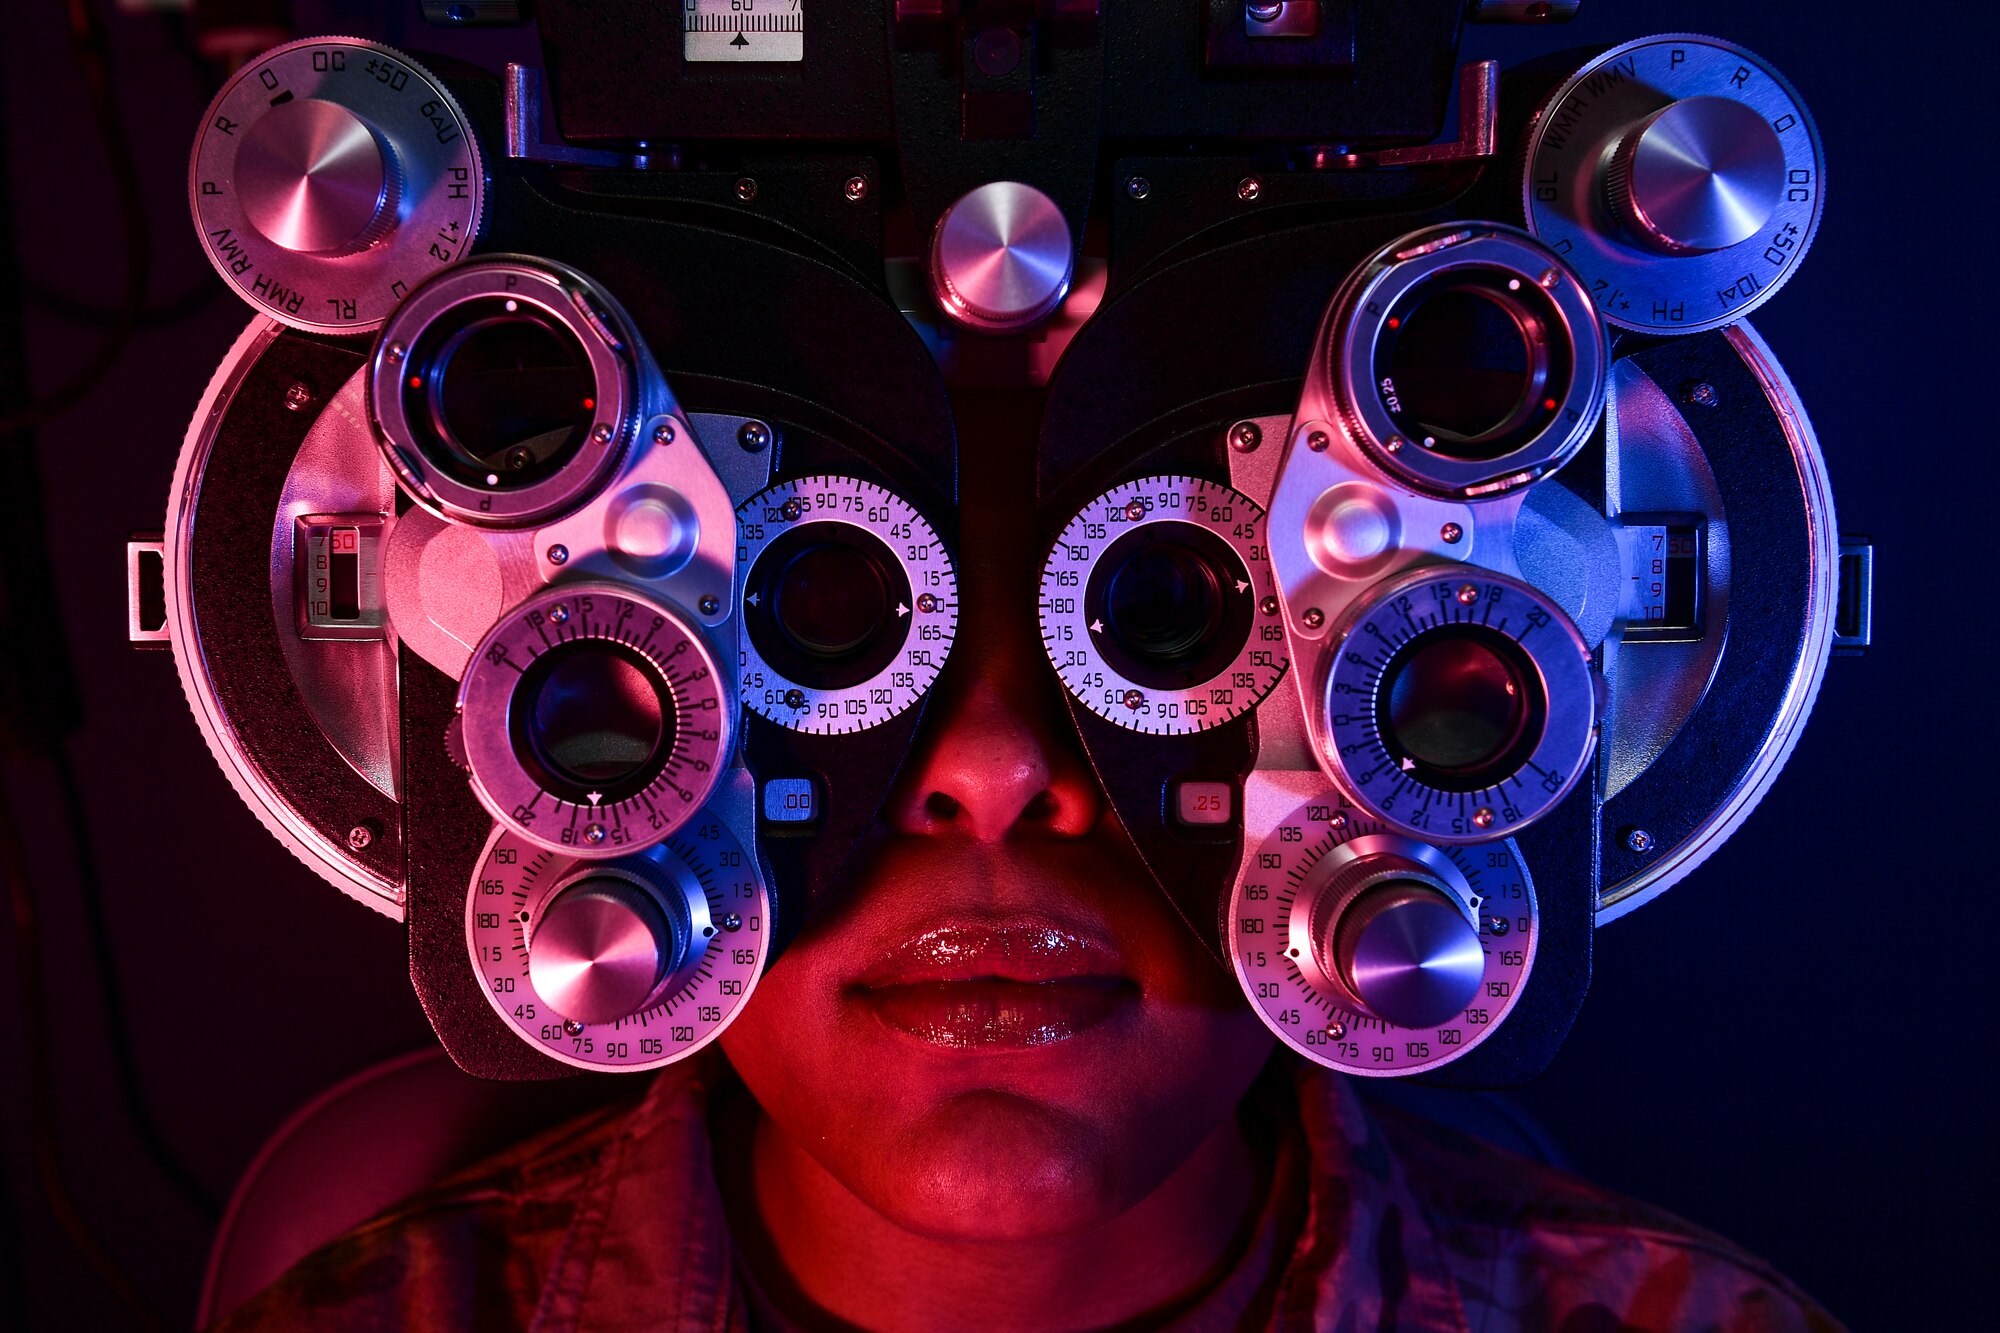 A patient looks through a phoropter during an eye examination training session